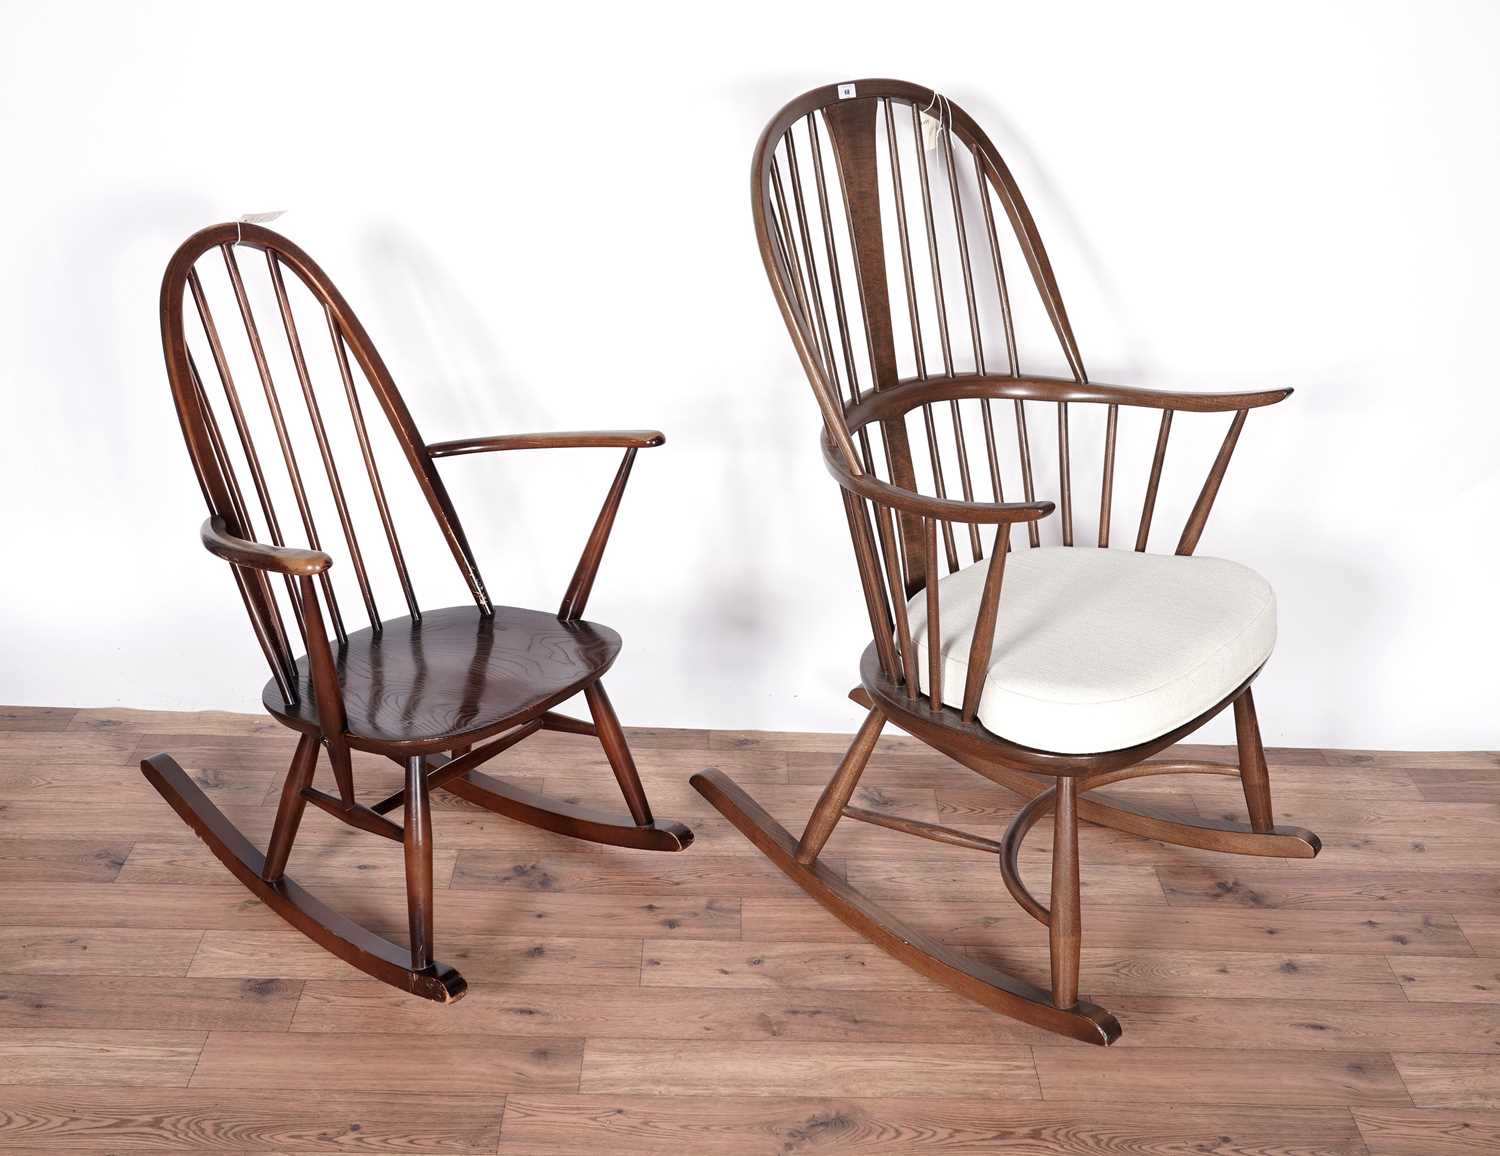 Ercol 'Chairmaker' rocking chair and a Windsor rocking chair - Image 3 of 5